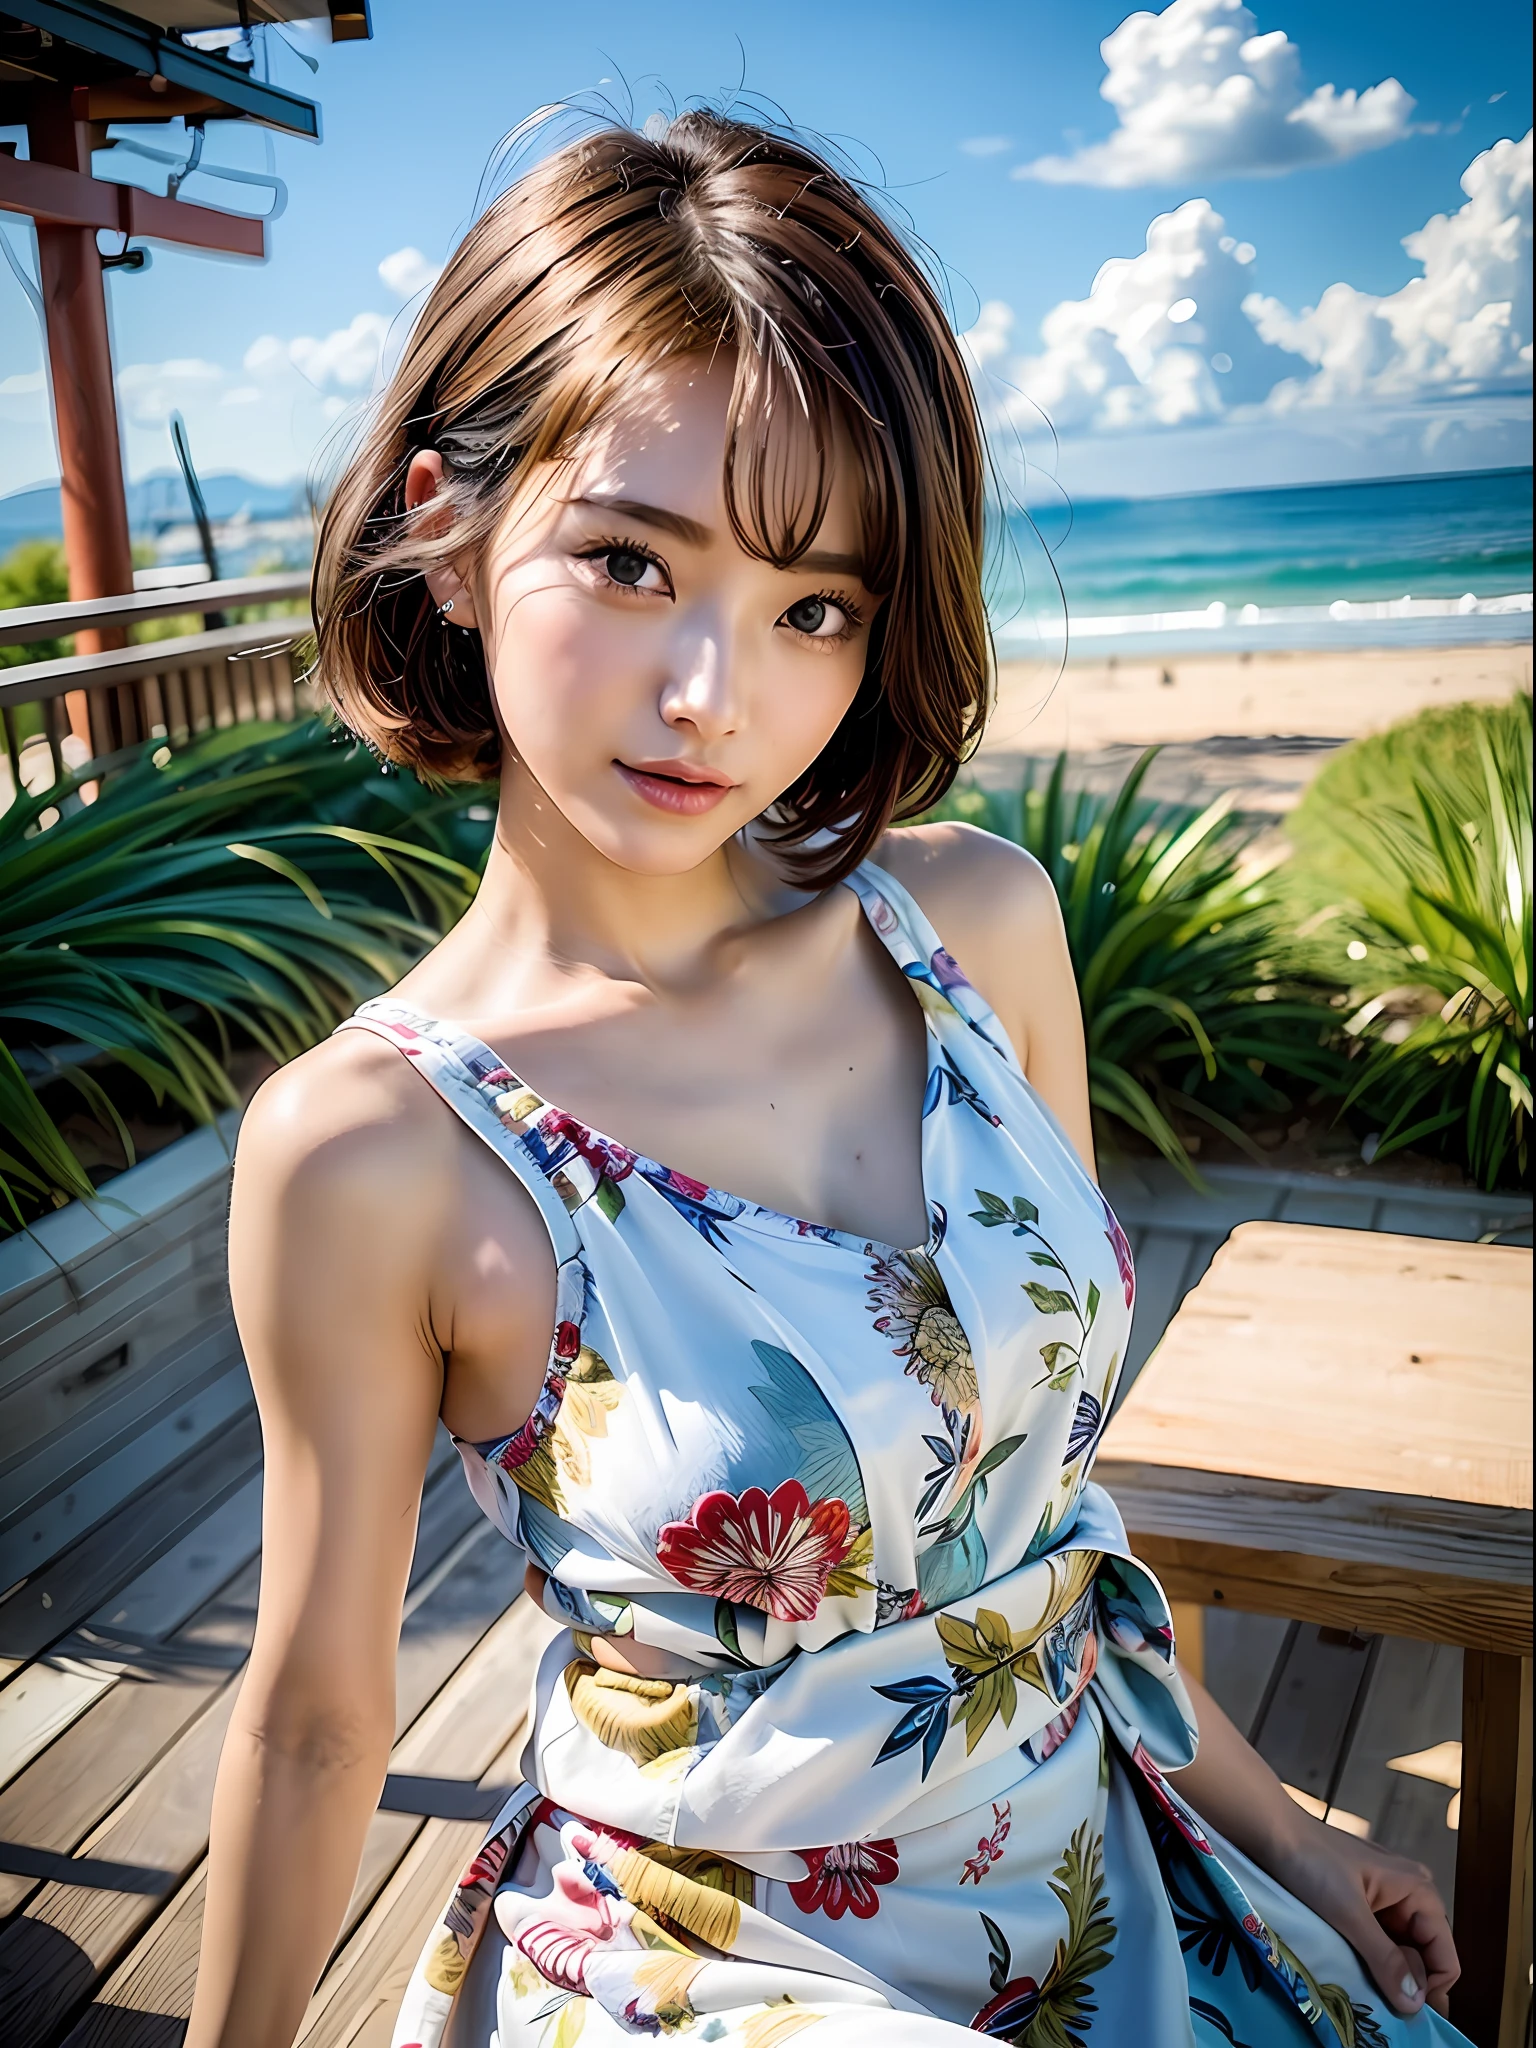 (8k, highest quality, masterpiece: 1.2), (hair_style), (realistic, photorealistic: 1.37), highest quality, masterpiece, shot on a wooden deck with a view of the sky and the sea in the summer sun [small breasts], backlit, shooting from the waist up, shooting at an angle from the bottom, posing with hands raking up hair, shooting with natural light from morning to noon, Hairstyles and fashion styles that match the Japan trends of 2023, realistic, super detailed, 30s, actress, half Japanese and Russian half model, elaborate CG, slender, adorable, hairstyle matches the fashion of Japan in 2023 short bob cut fluttering in the wind, delicate skin type, fine details and softness, model hair color is bright and soft, Choose a short-length T-shirt that matches the summer trends of 2023 and pair it with pale pastel colors for surf fashion.